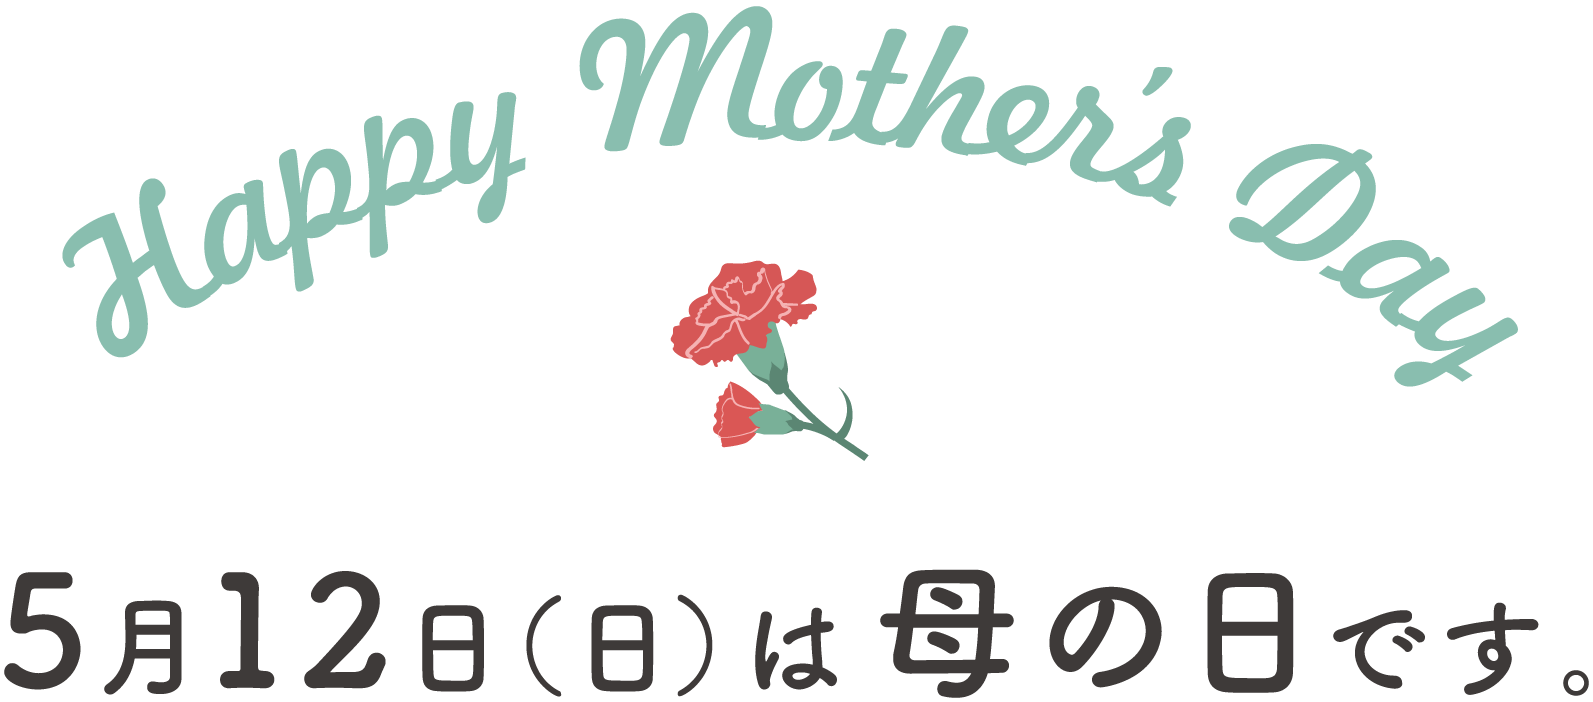 Happy Mothers Day 5月12日は母の日です。